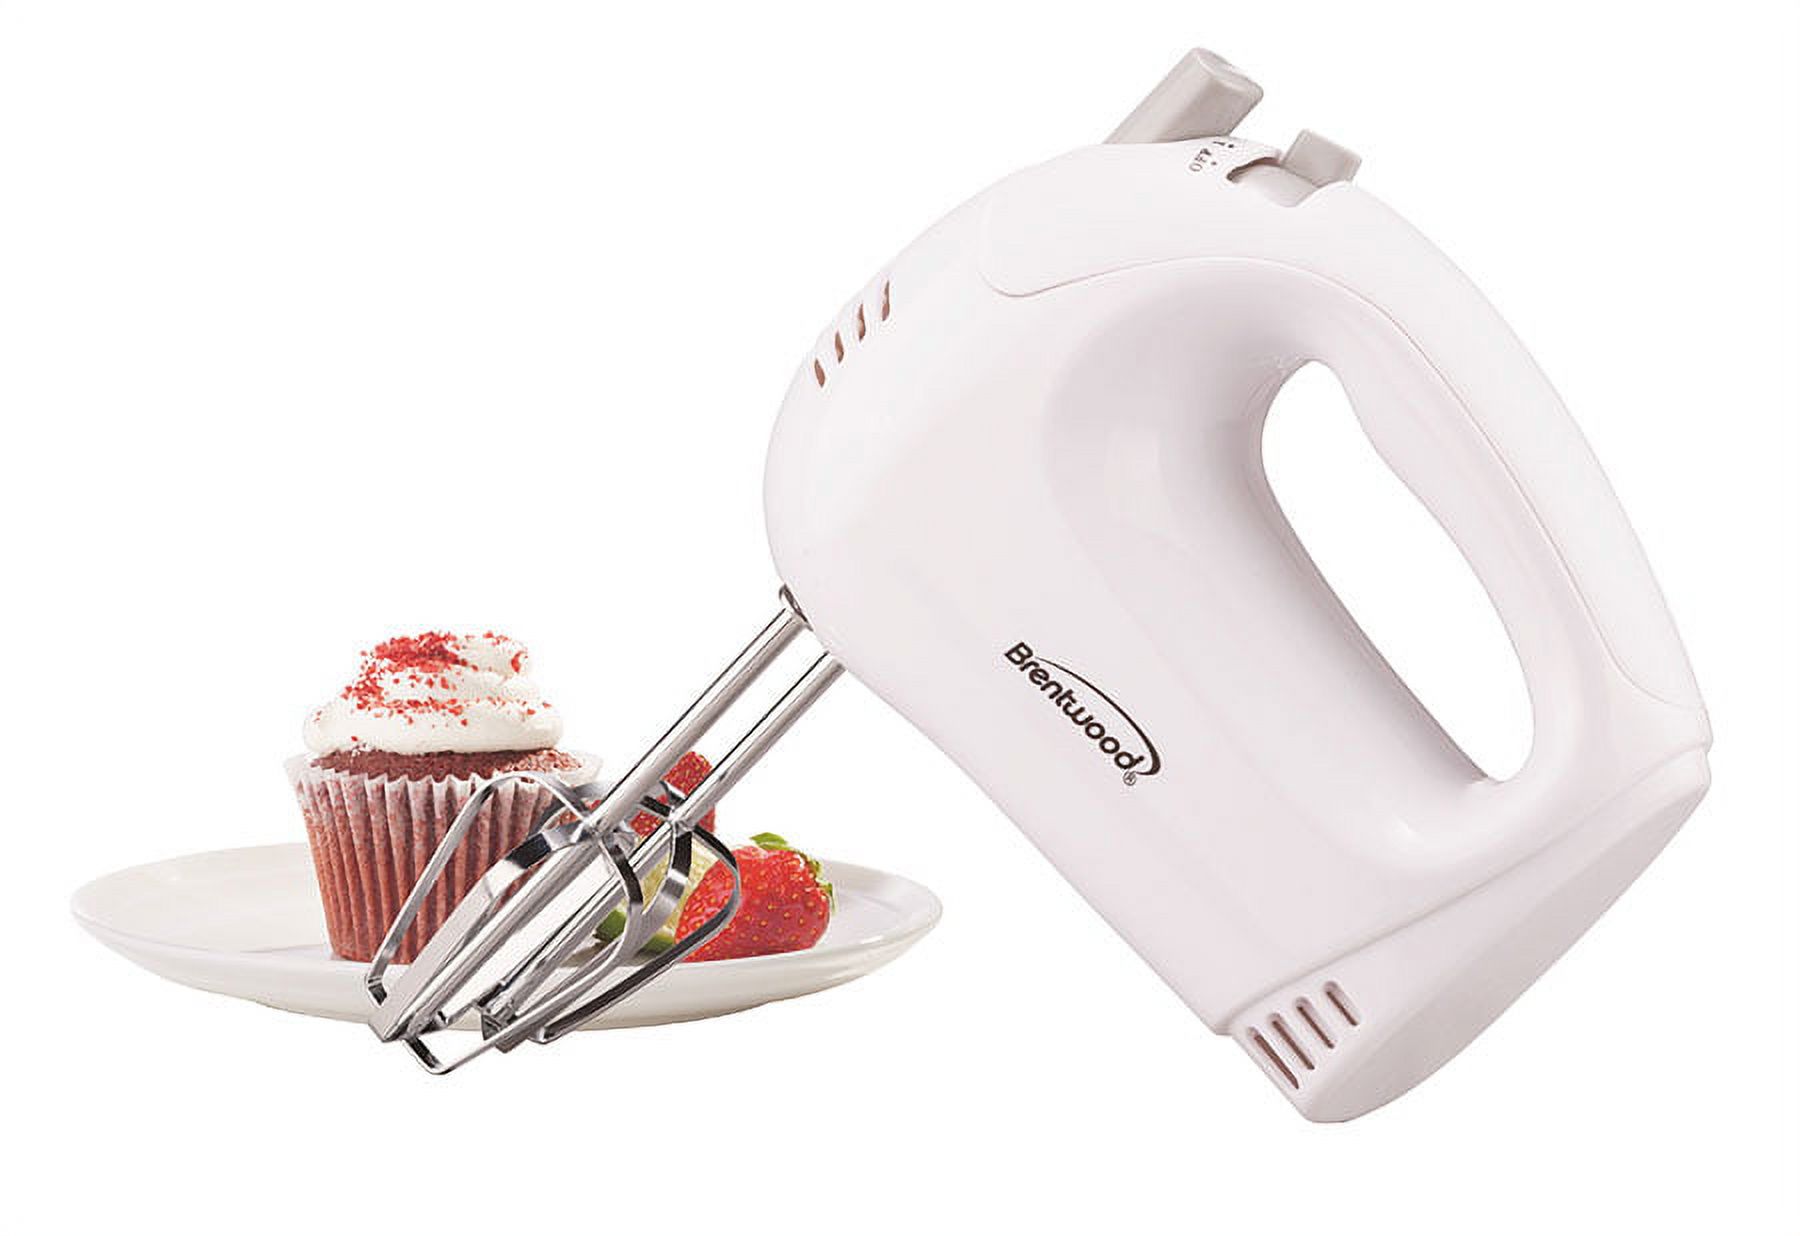 Brentwood HM-45 Lightweight 5-Speed Electric Hand Mixer, White - image 2 of 8